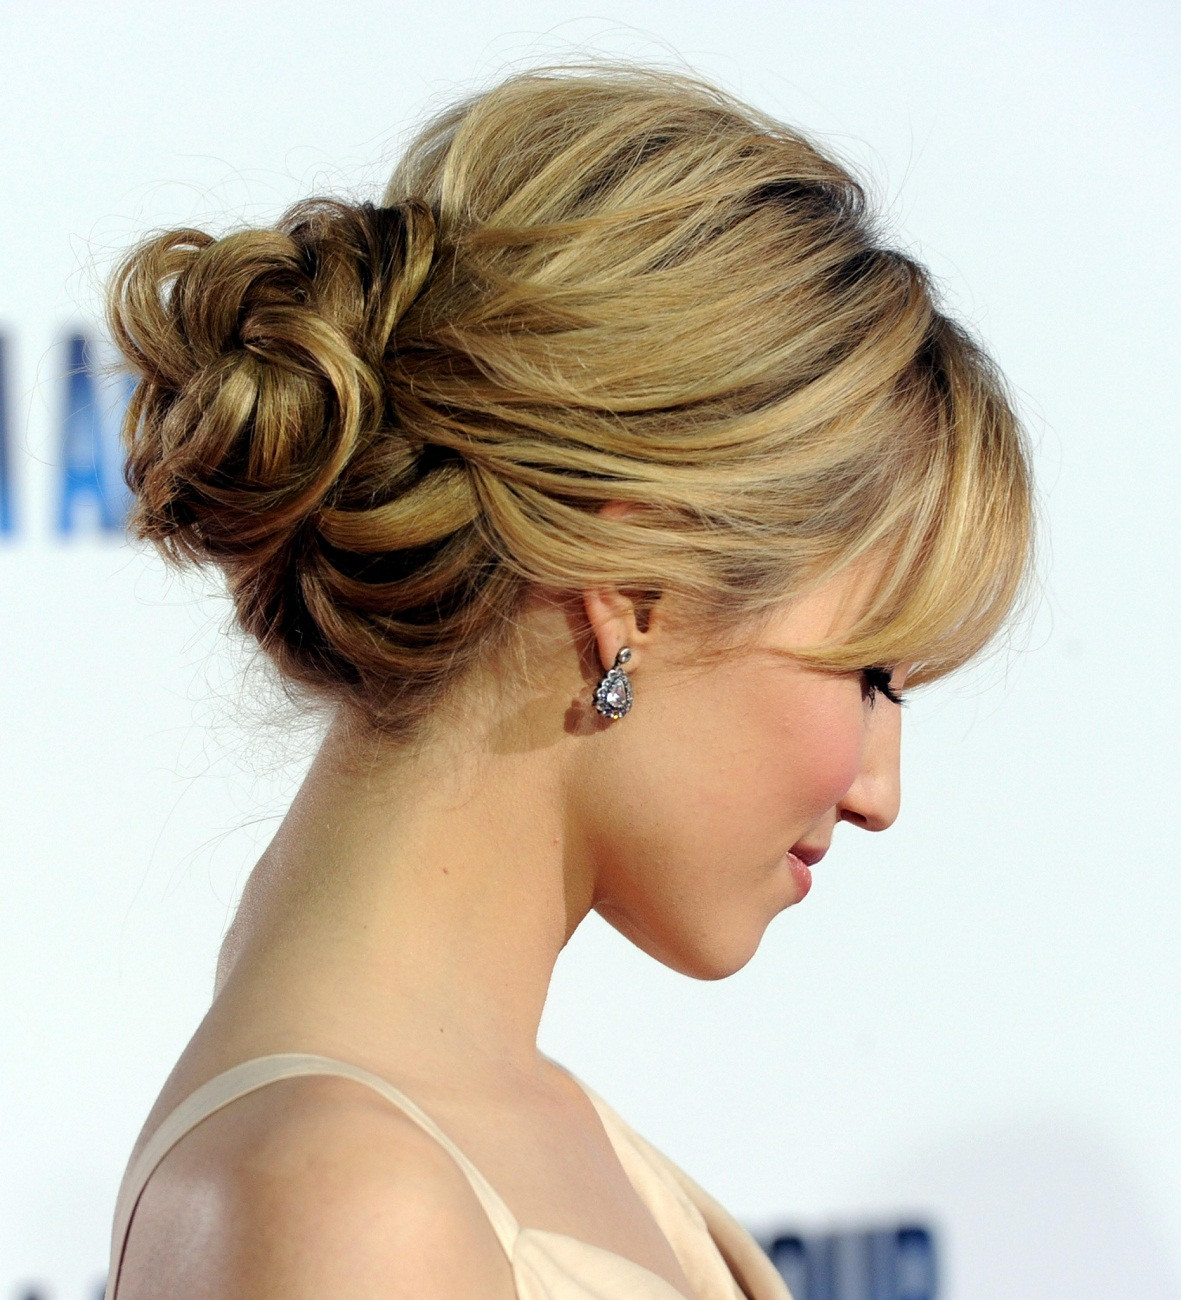 Shoulder Length Prom Hairstyles
 Attractive Prom Hairstyles for Medium Hair